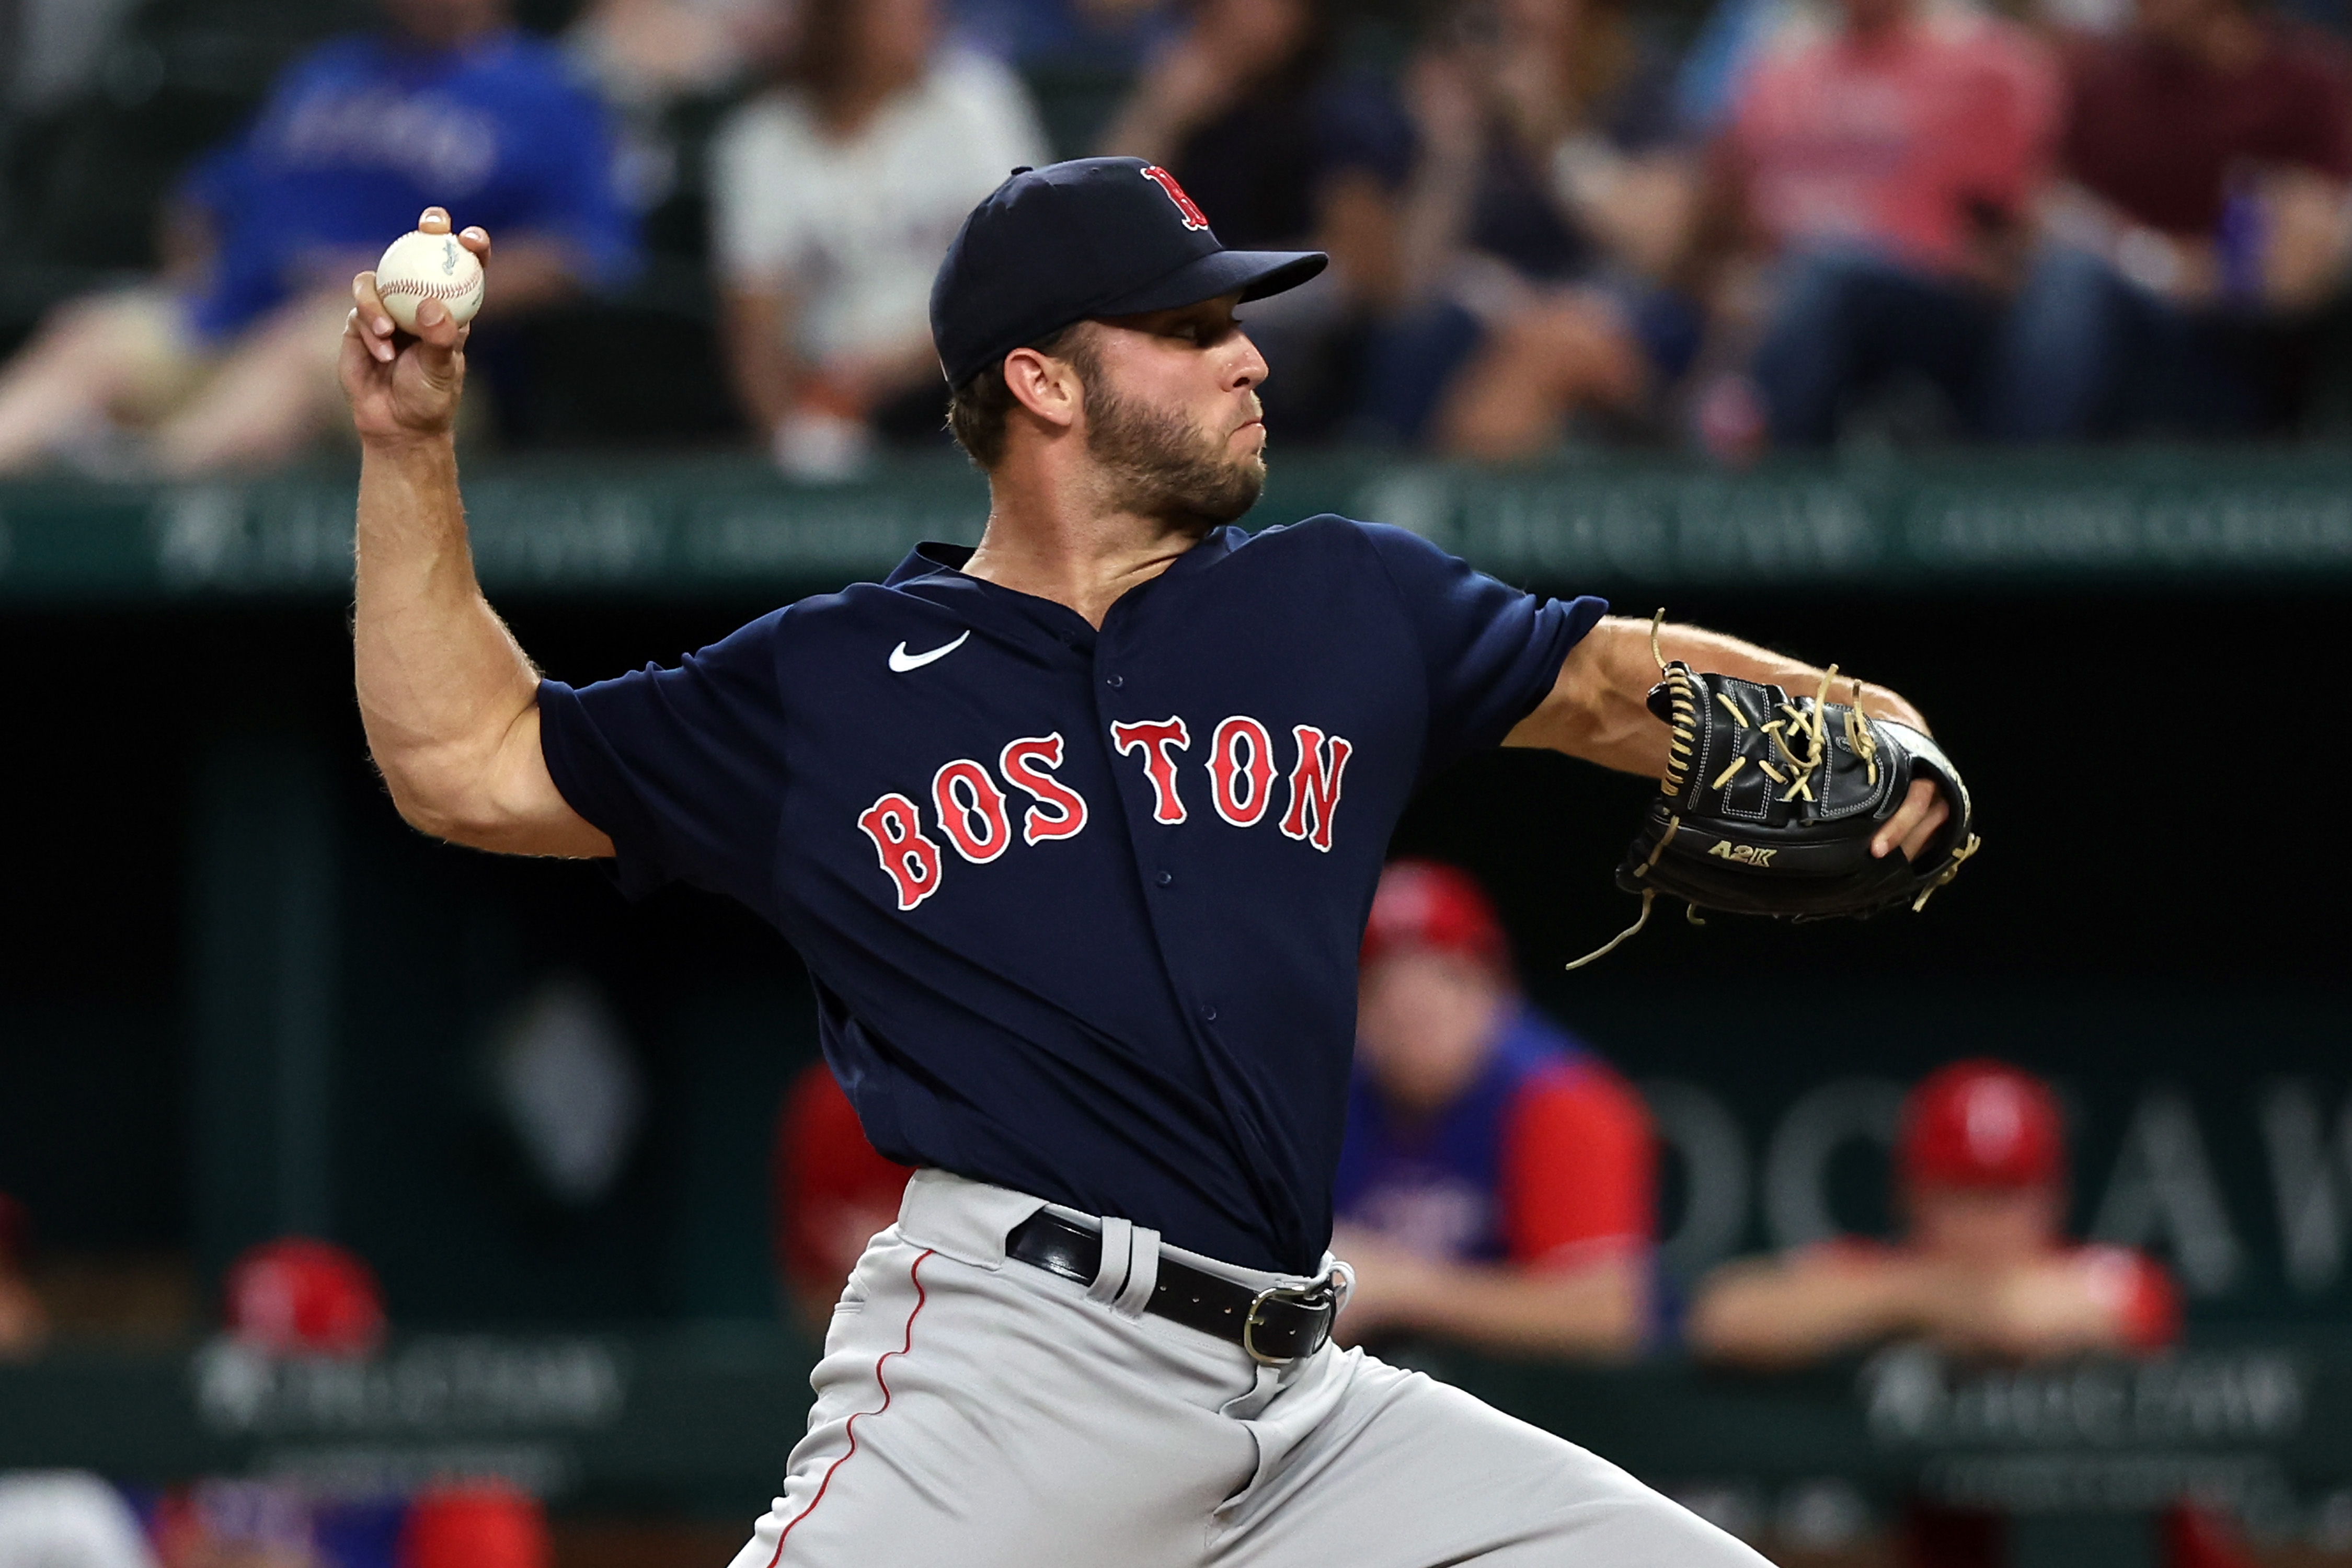 Martinez, Dalbec homers power Red Sox past Mariners in Seattle